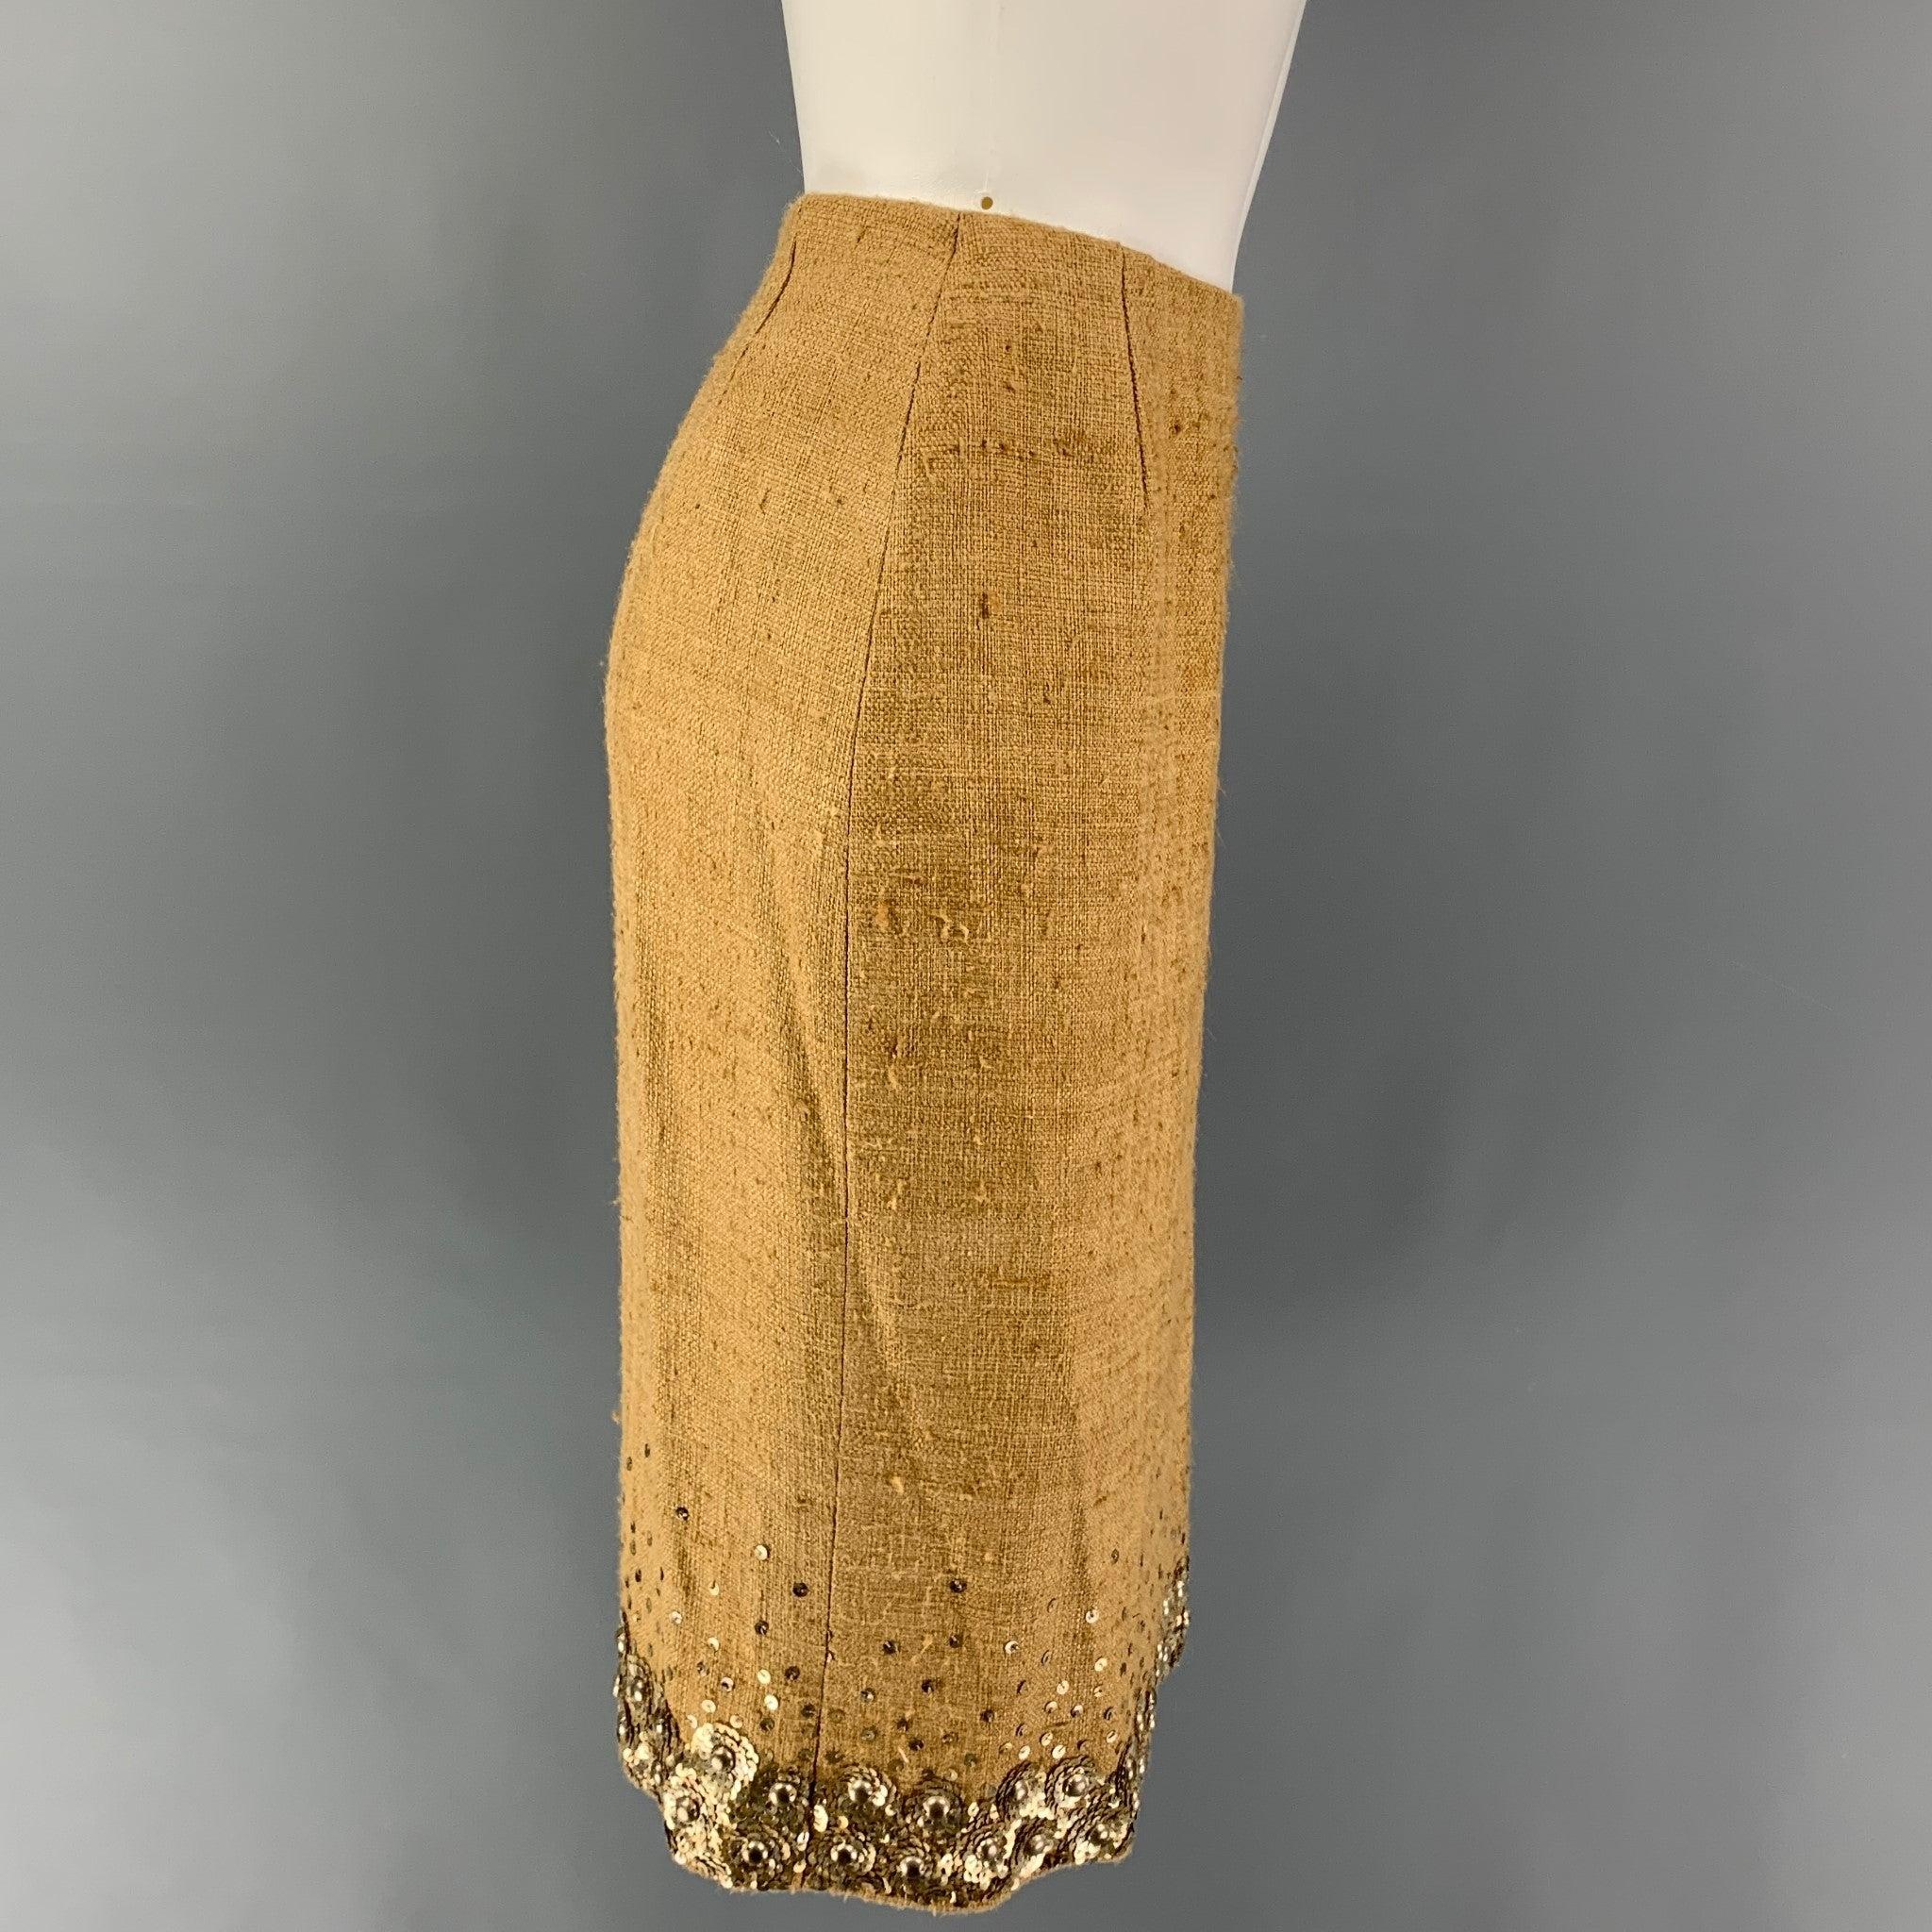 OSCAR DE LA RENTA skirt comes in a beige silk with a slip liner featuring a pencil style, sequined trim, beaded embellishments, and a side zipper closure.
Made in USA. Very Good Pre-Owned Condition. 

Marked:   6 

Measurements: 
  Waist: 27 inches 